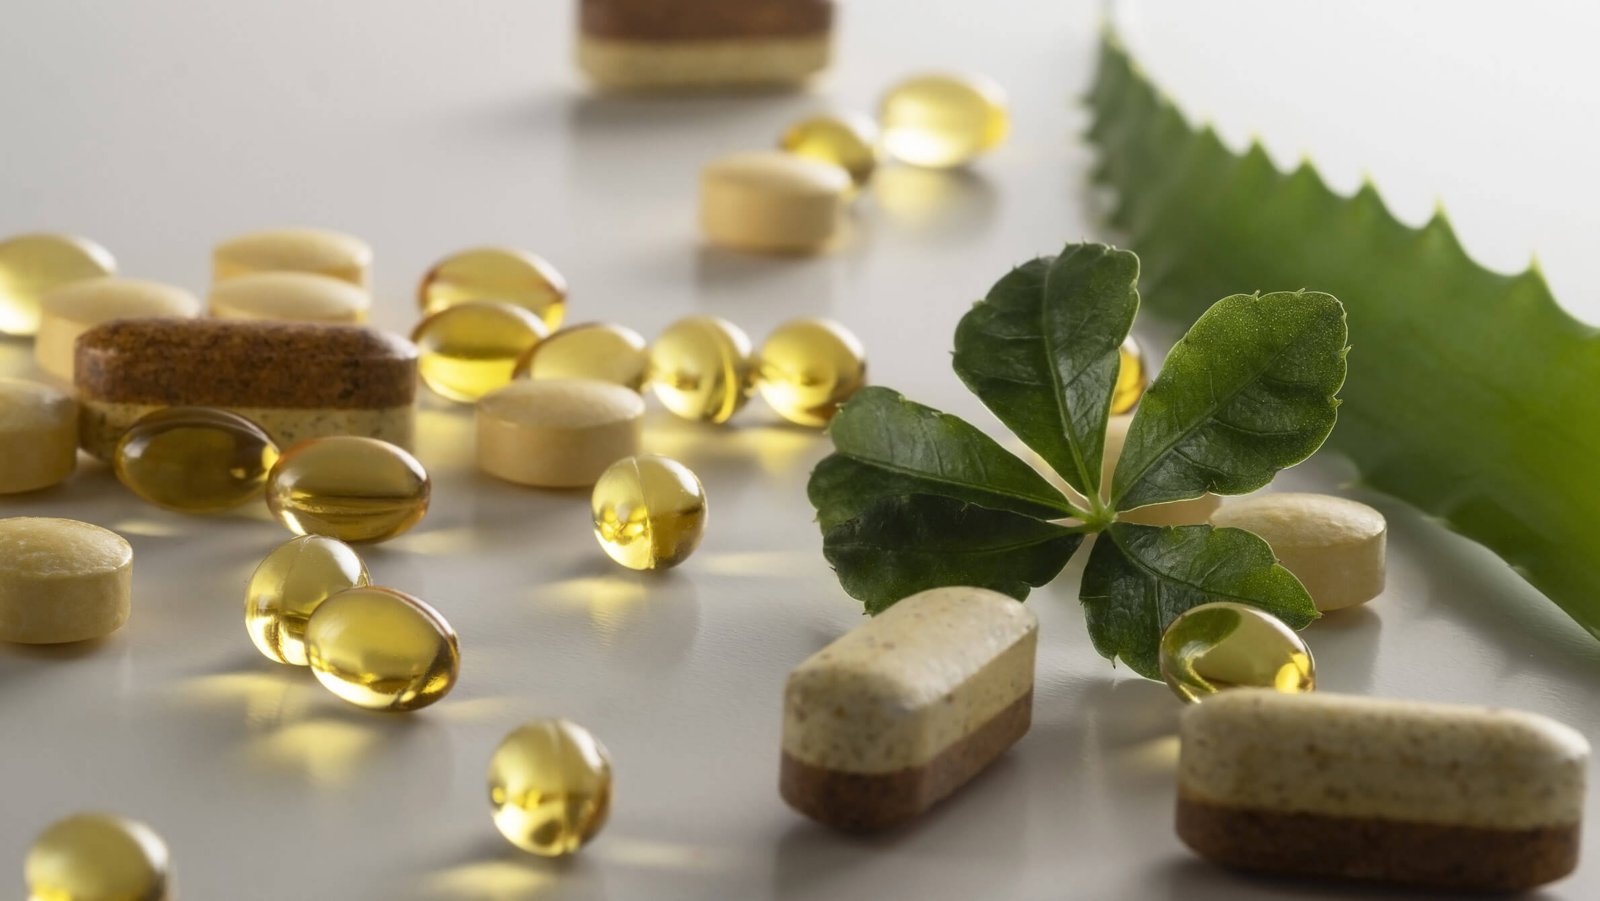 Quality Control Management of Nutraceuticals and Dietary Supplements